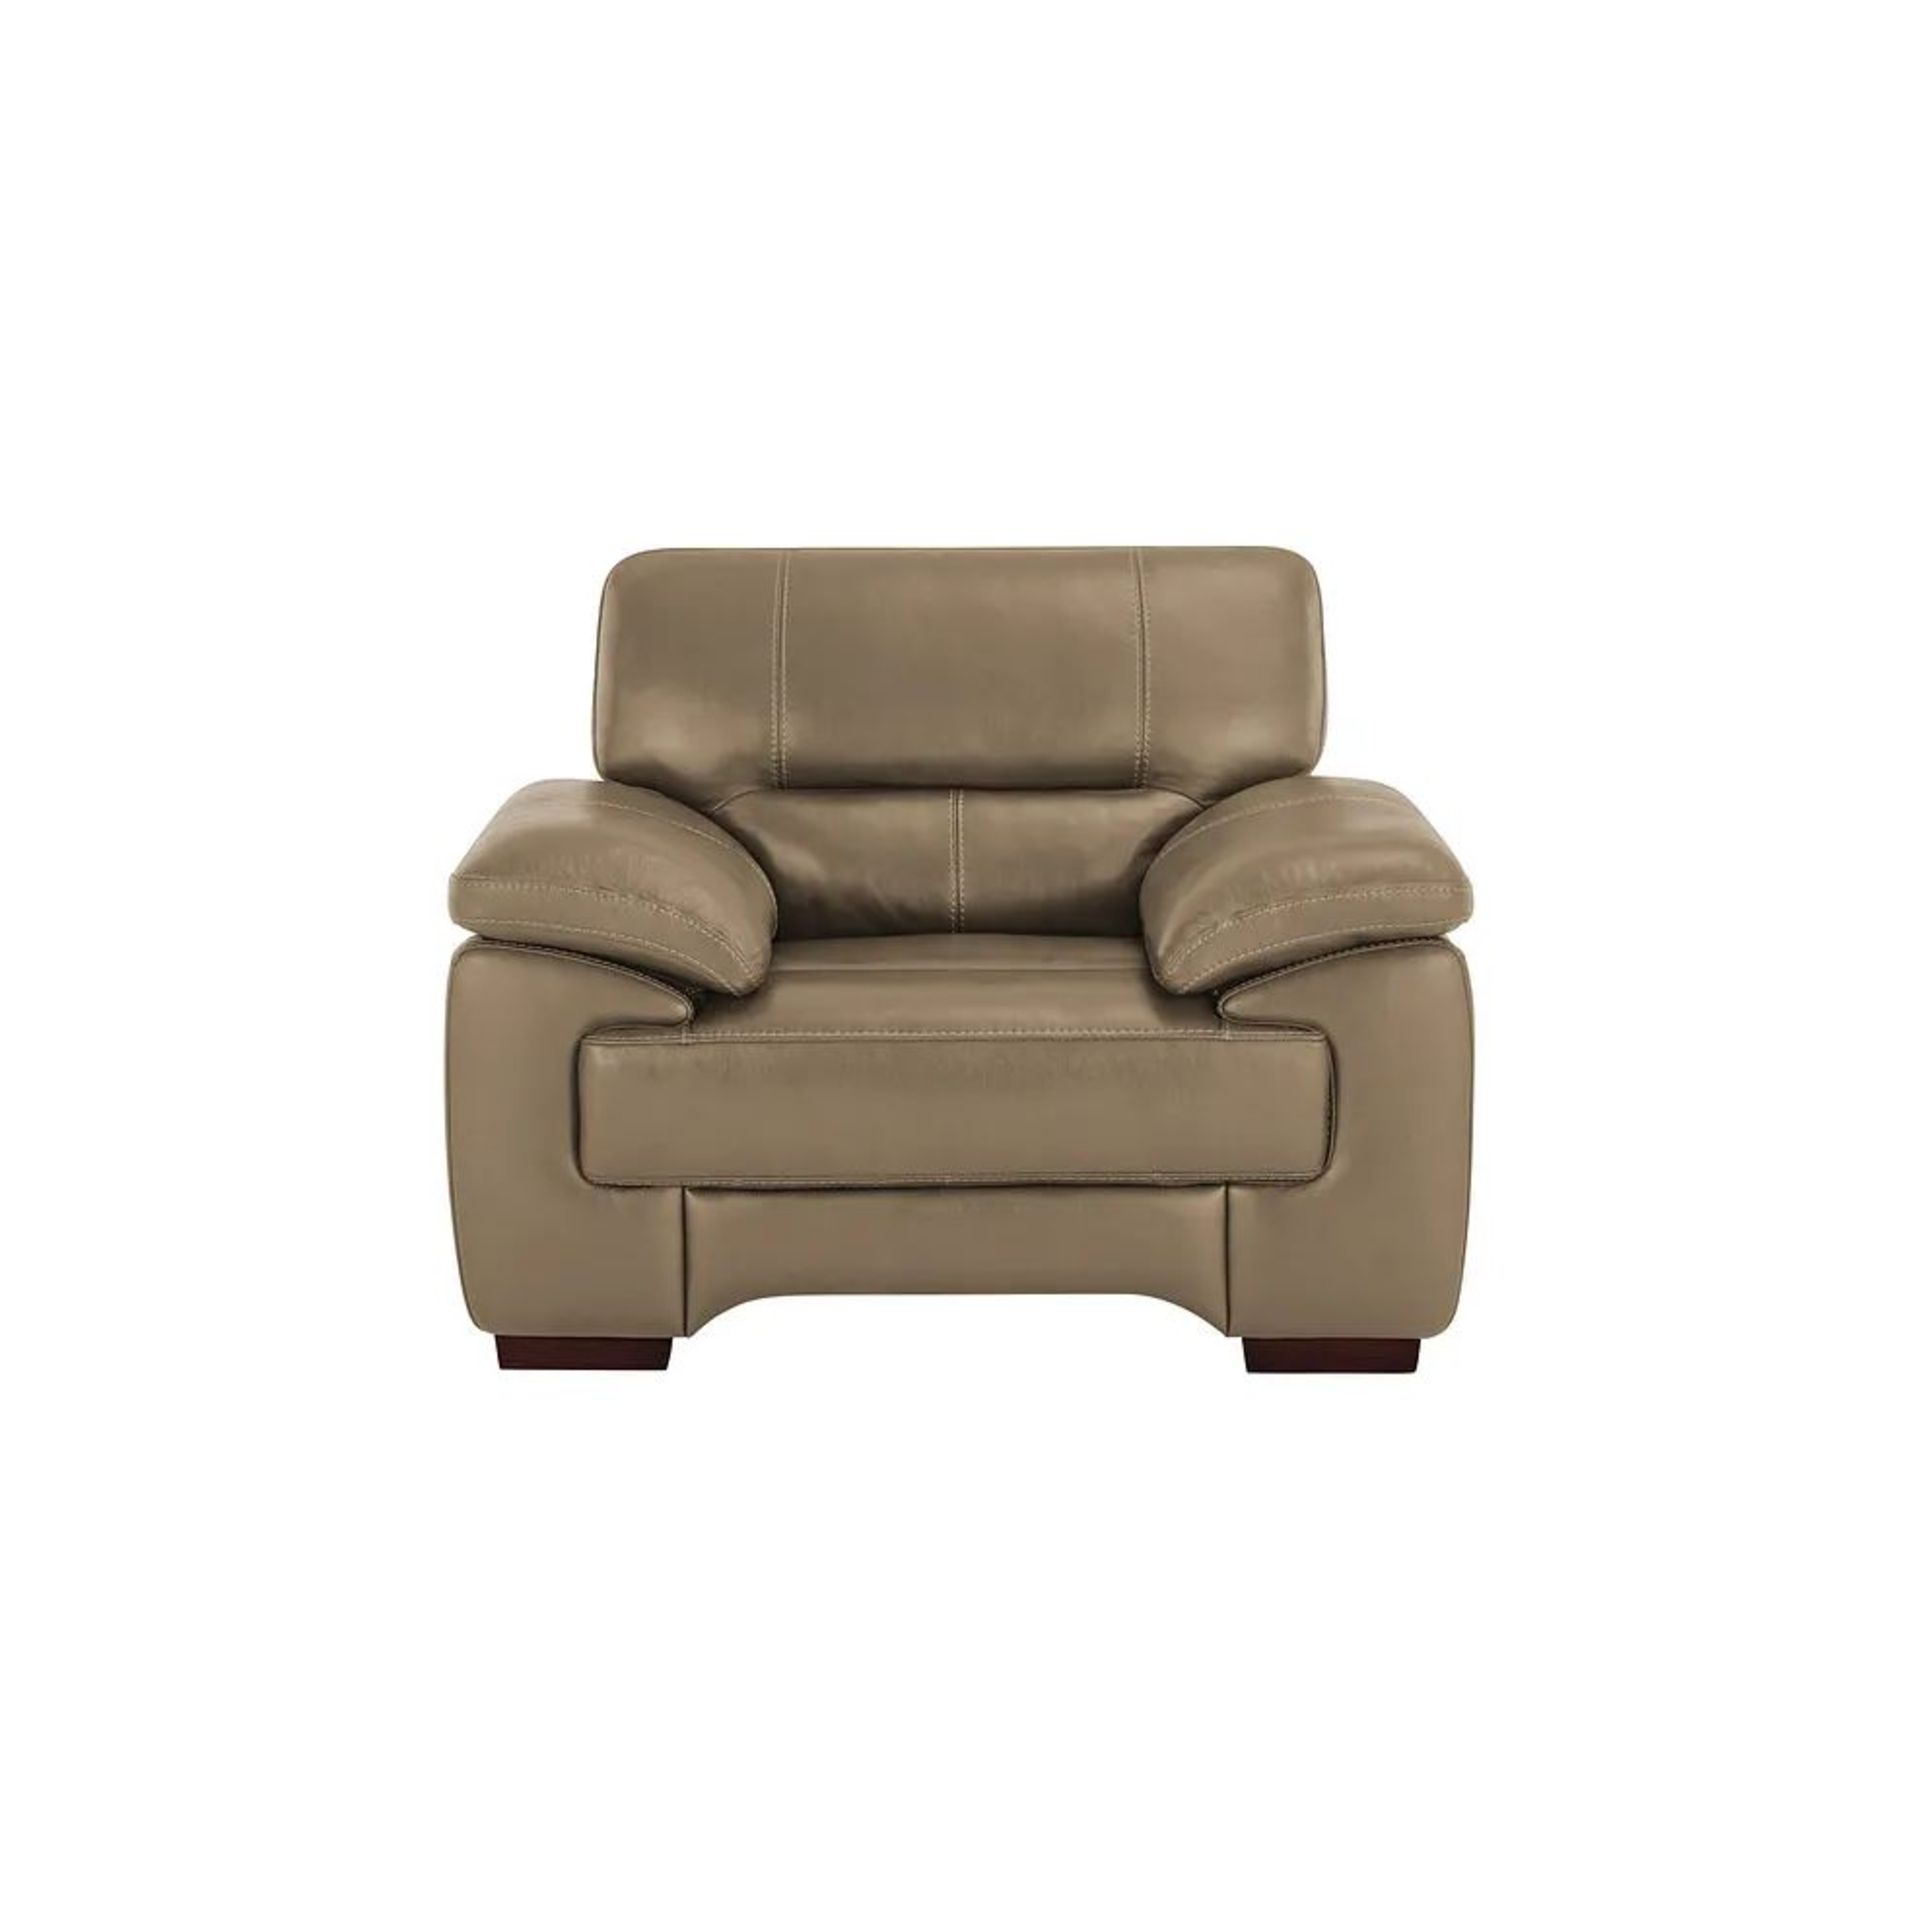 BRAND NEW ARLINGTON Armchair - BEIGE LEATHER. RRP £1099. Create a traditional and homely feel in - Image 2 of 9